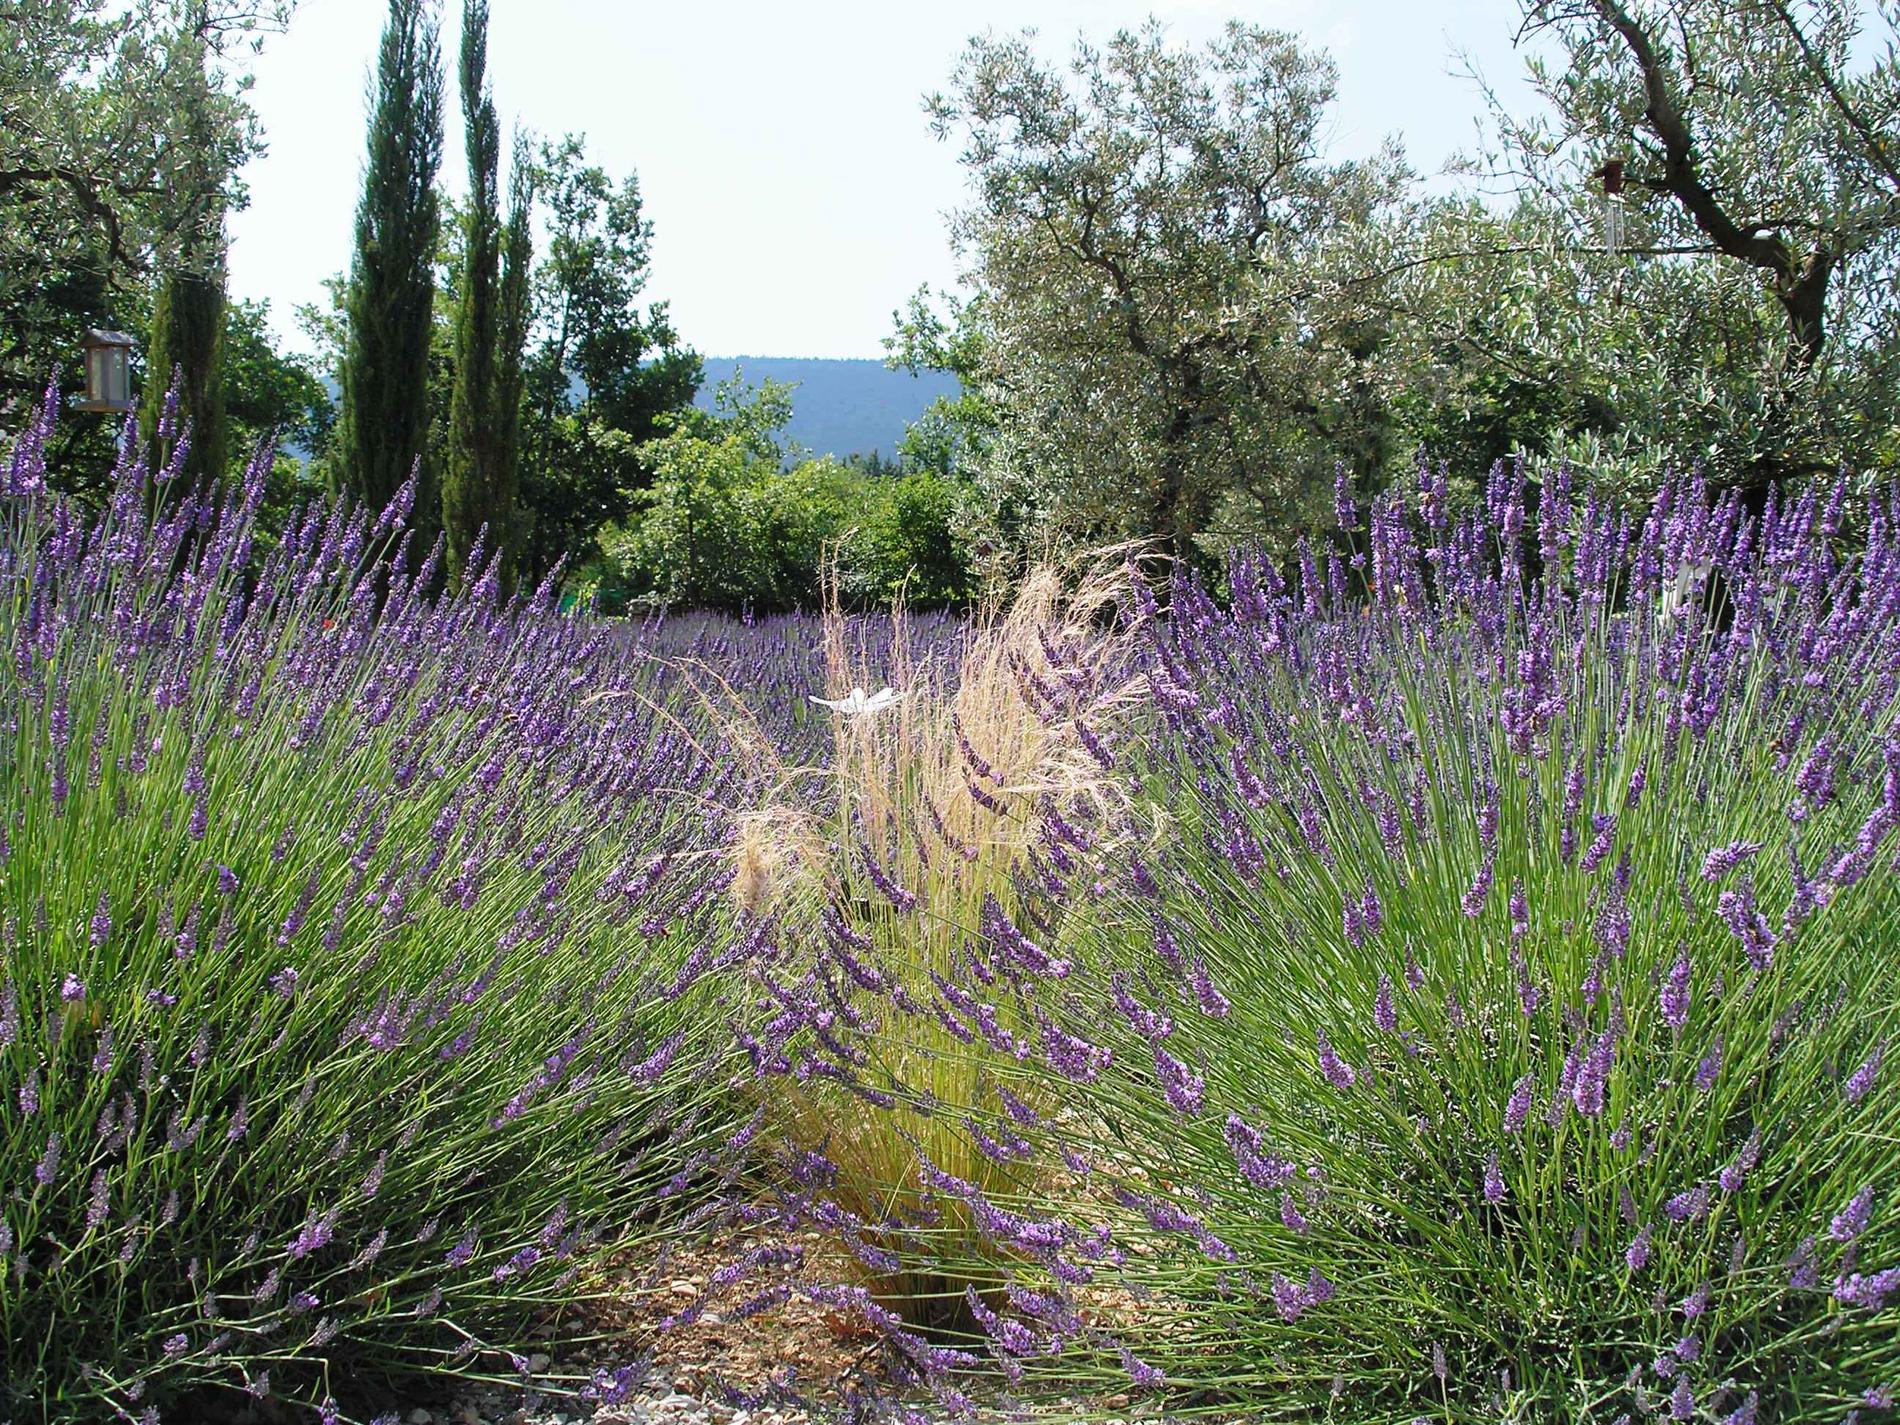 Its abundant vegetation provides a beneficial freshness during the summer, to enjoy the pleasures of nature and leave you intoxicated by the scent of lavender